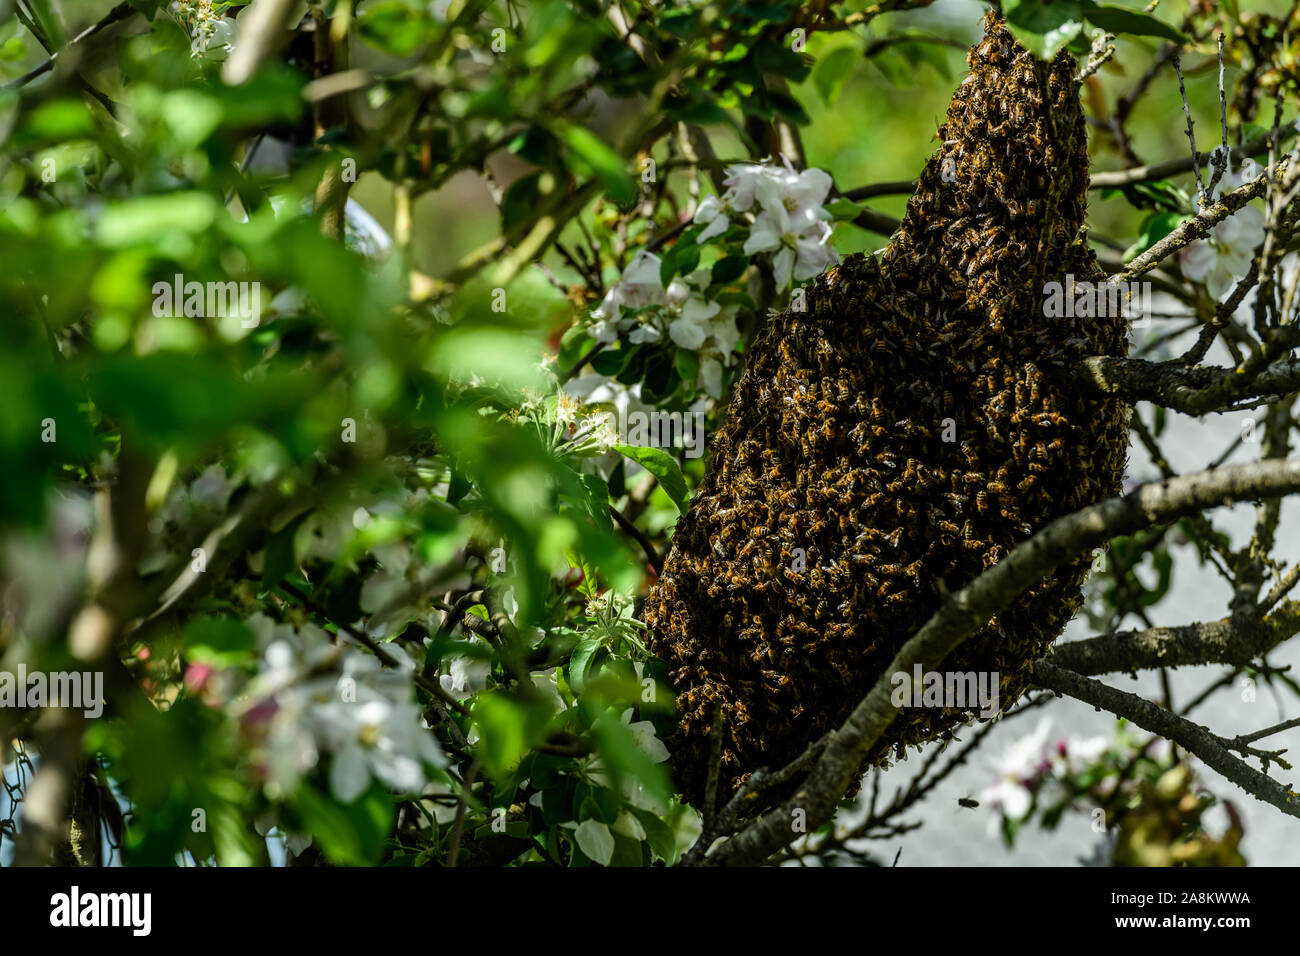 Swarm of bees hanging from peach tree branch on a warm Spring morrning Stock Photo